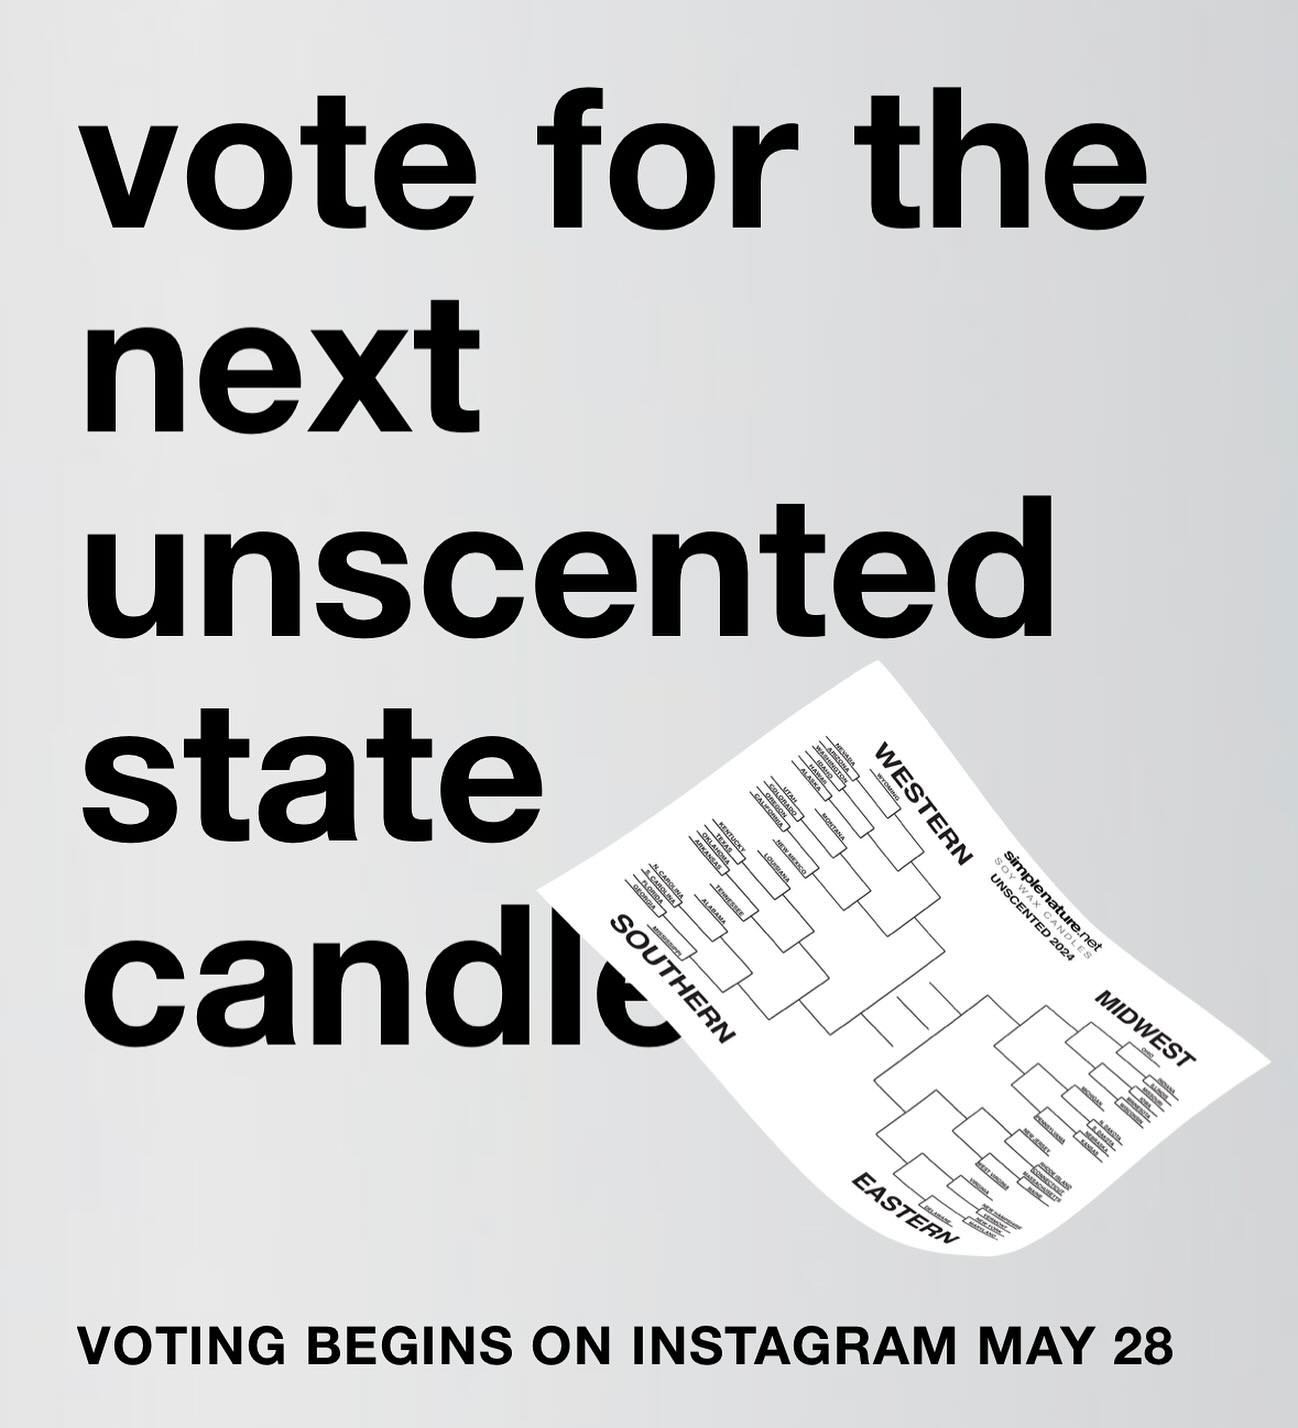 It&rsquo;s time to give Ohio a chance. Voting for the next unscented candle begins May 28th on Instagram. 
Fill out and post your bracket before Monday and get a 20% off code. Fill out a perfect bracket and you&rsquo;ll win 5 free candles. 
Download 